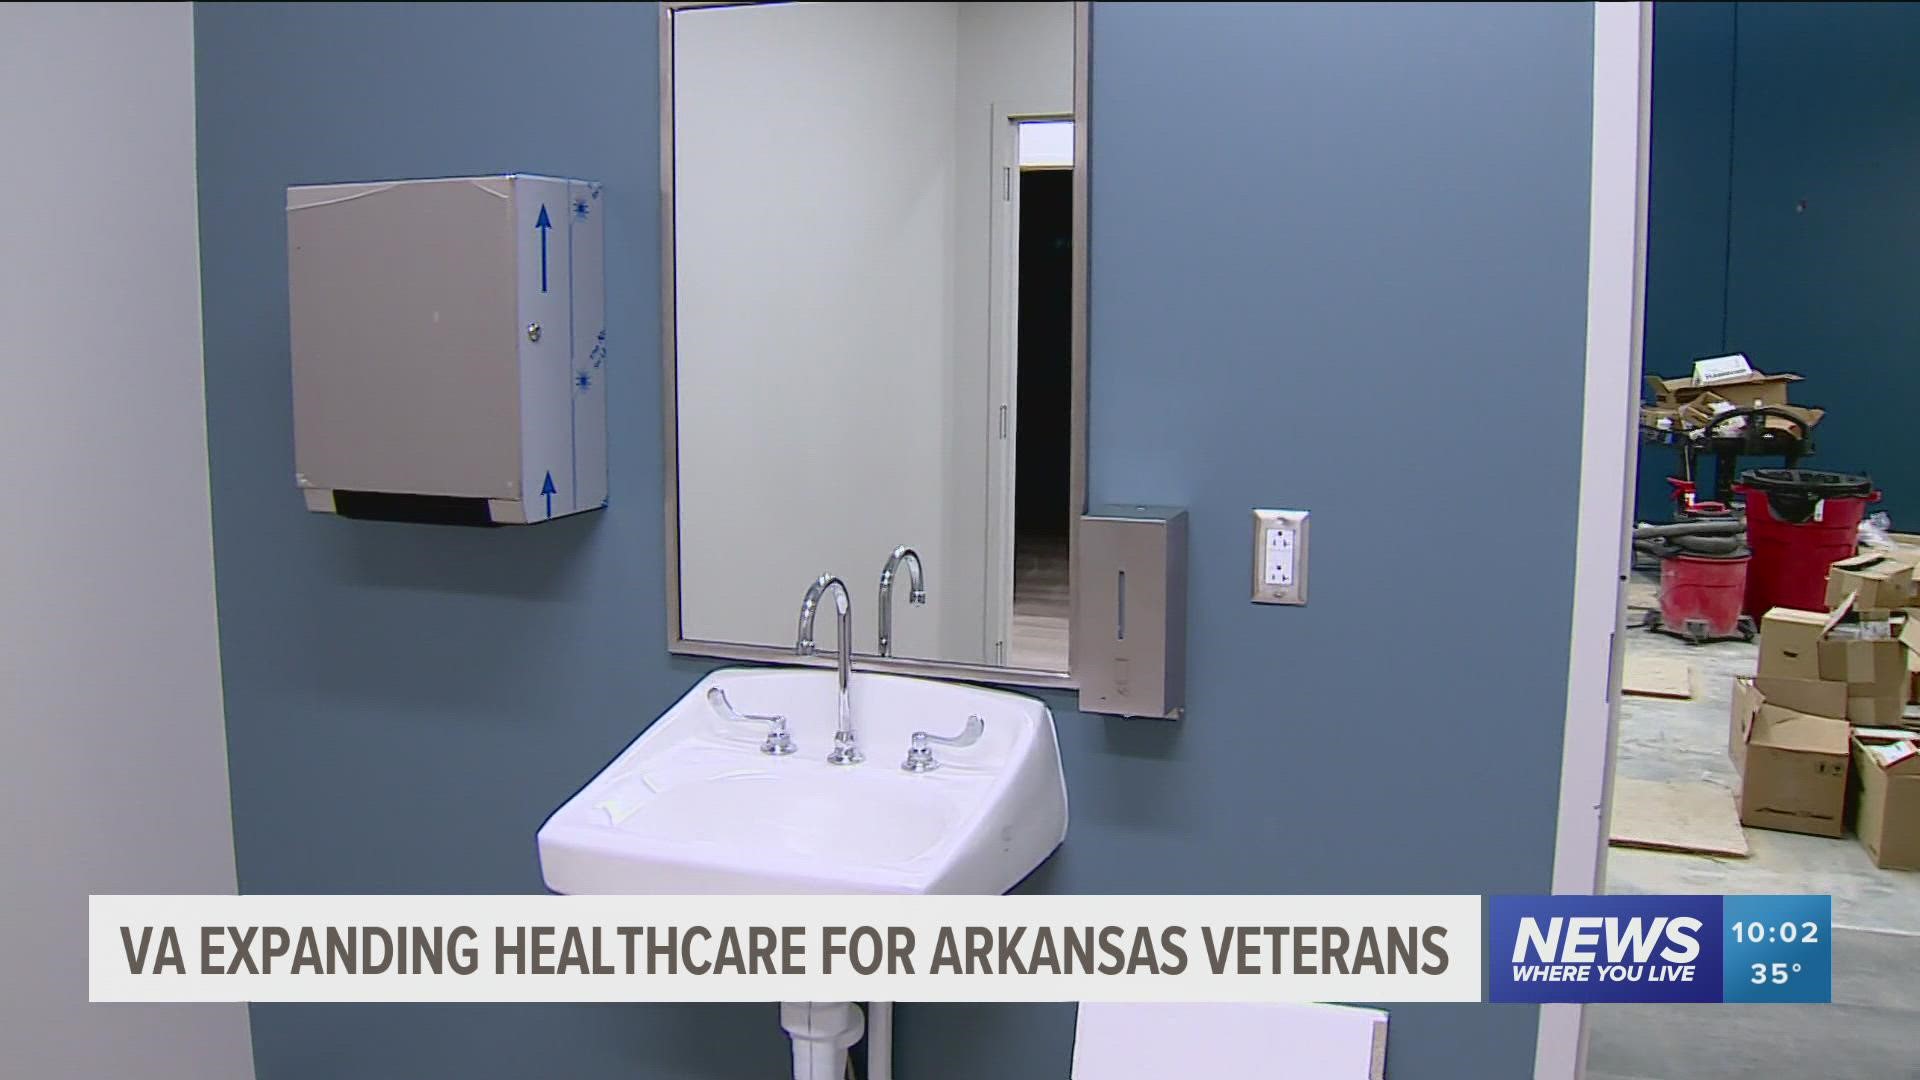 VA secretary announces two new clinics NWA and River Valley early next year.